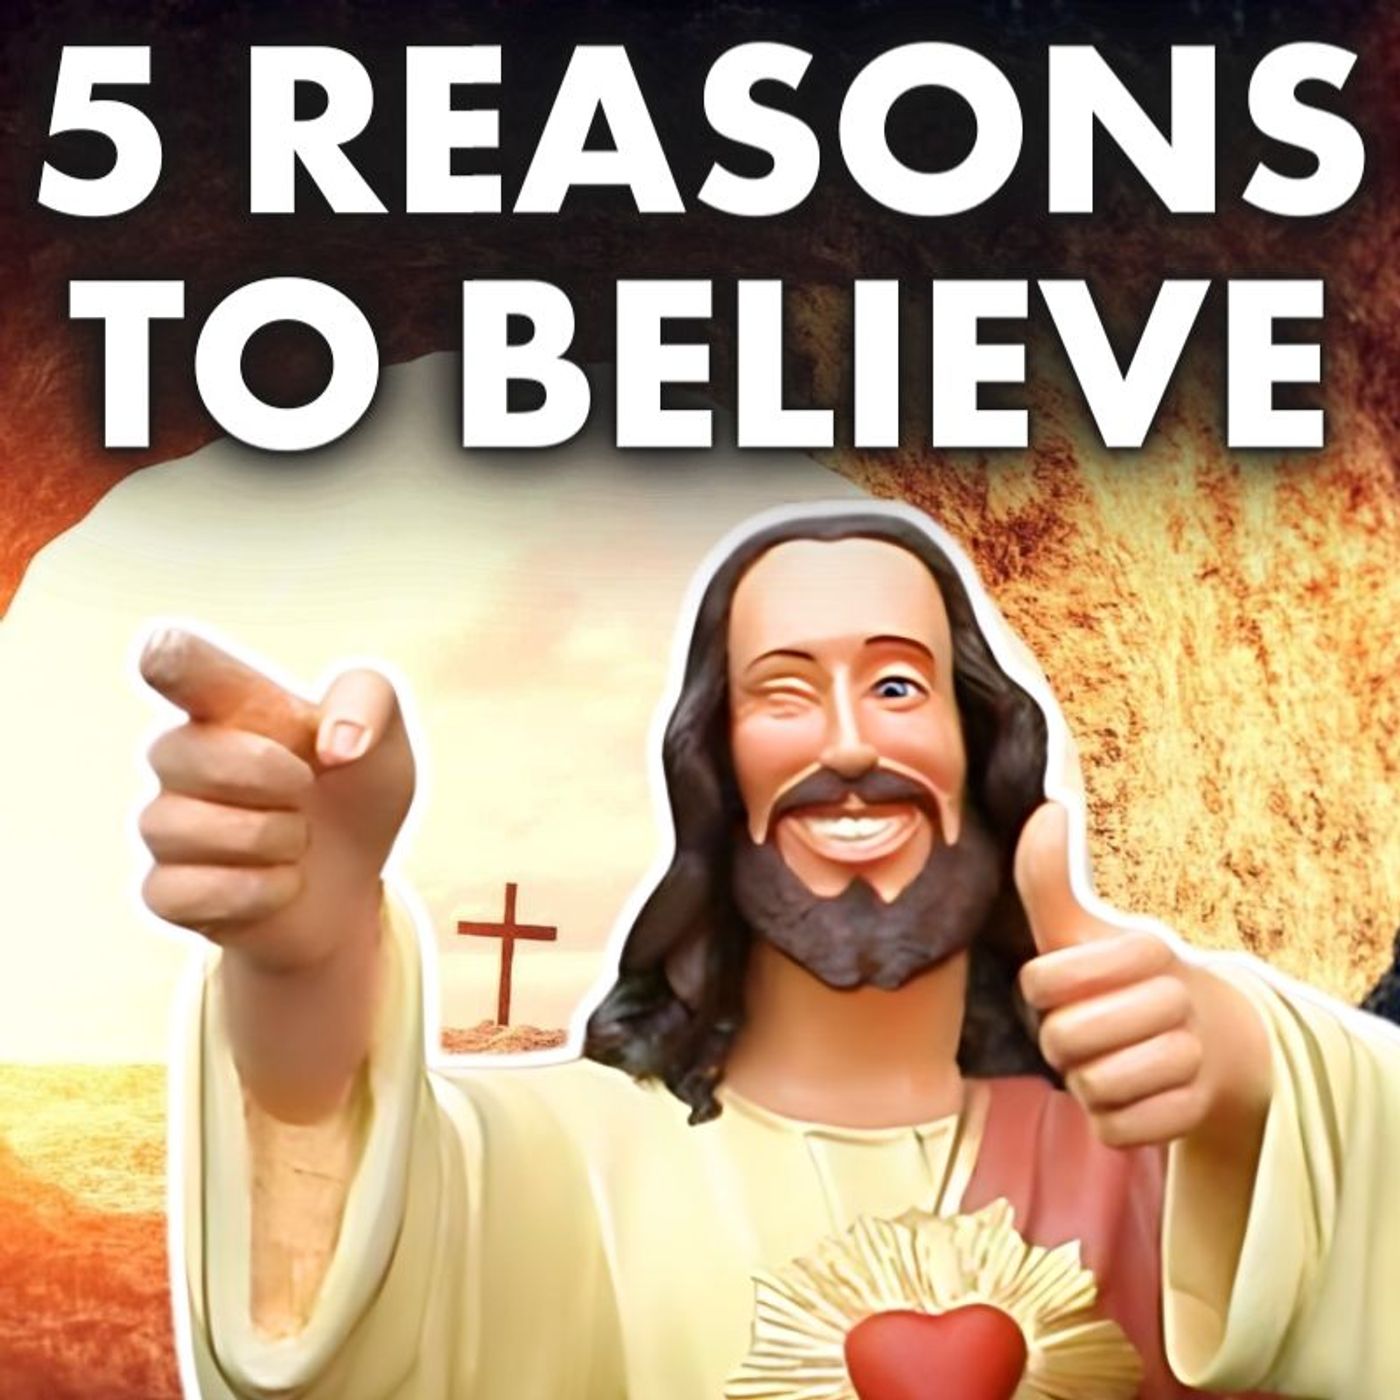 5 Reasons You Should Be a Christian!